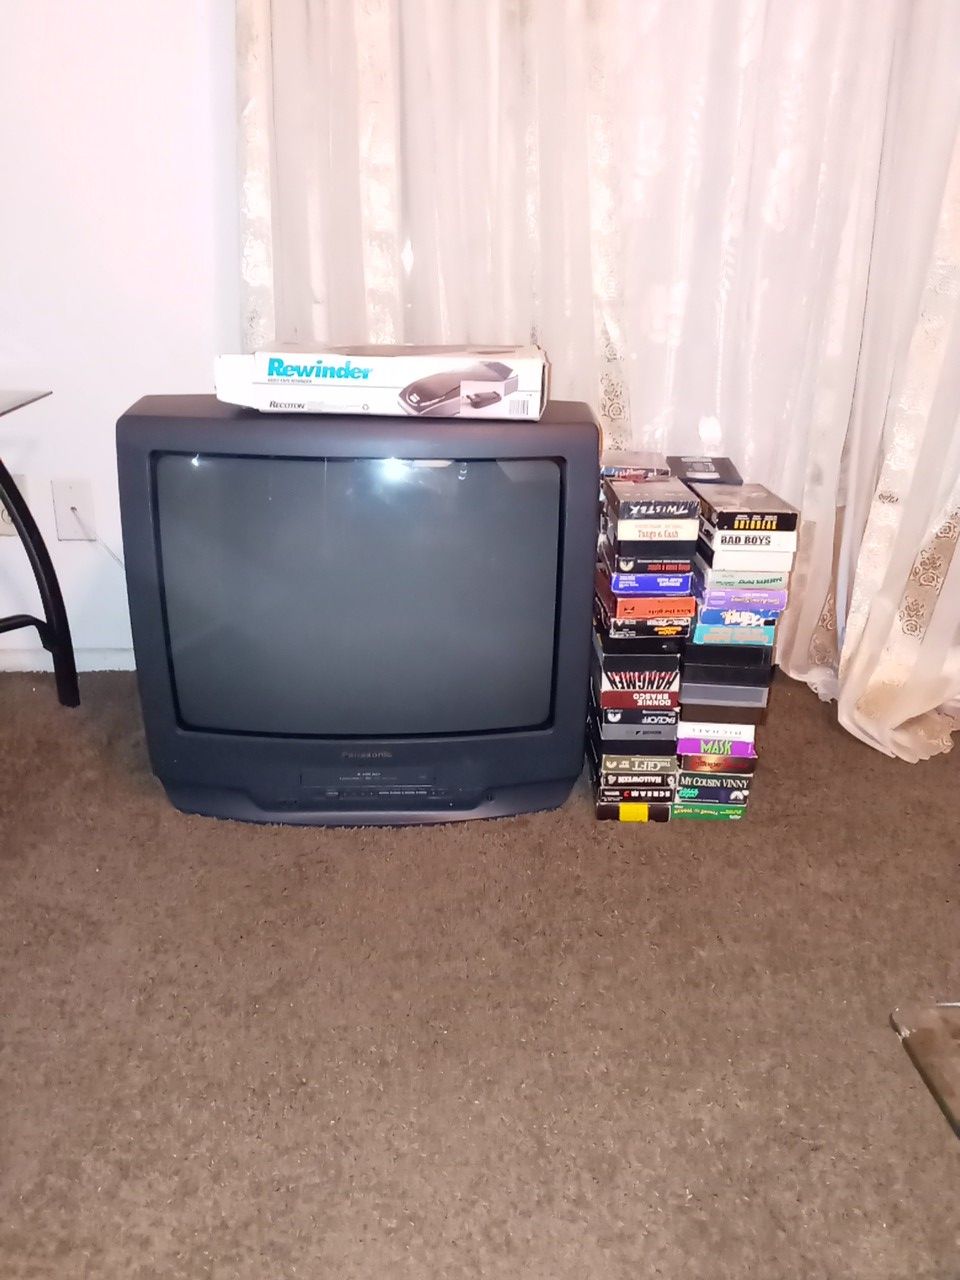 Panasanic VHS with 60 movies with the remote control $20